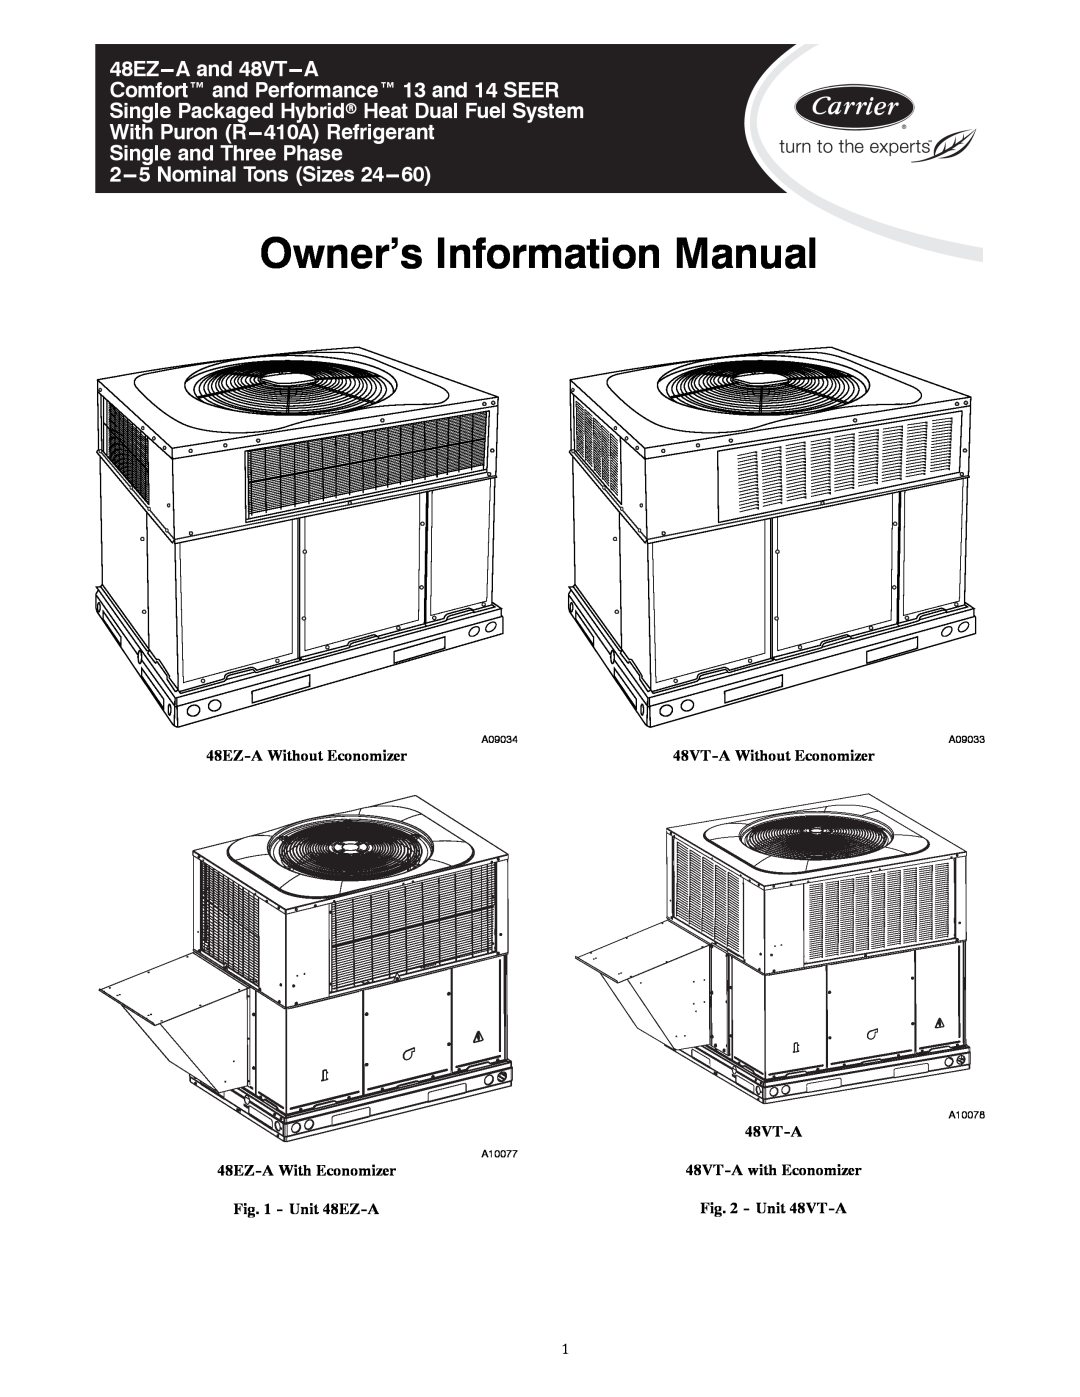 Carrier installation instructions Table Of Contents, Safety Considerations, Unit 48EZ-A, Installation Instructions 